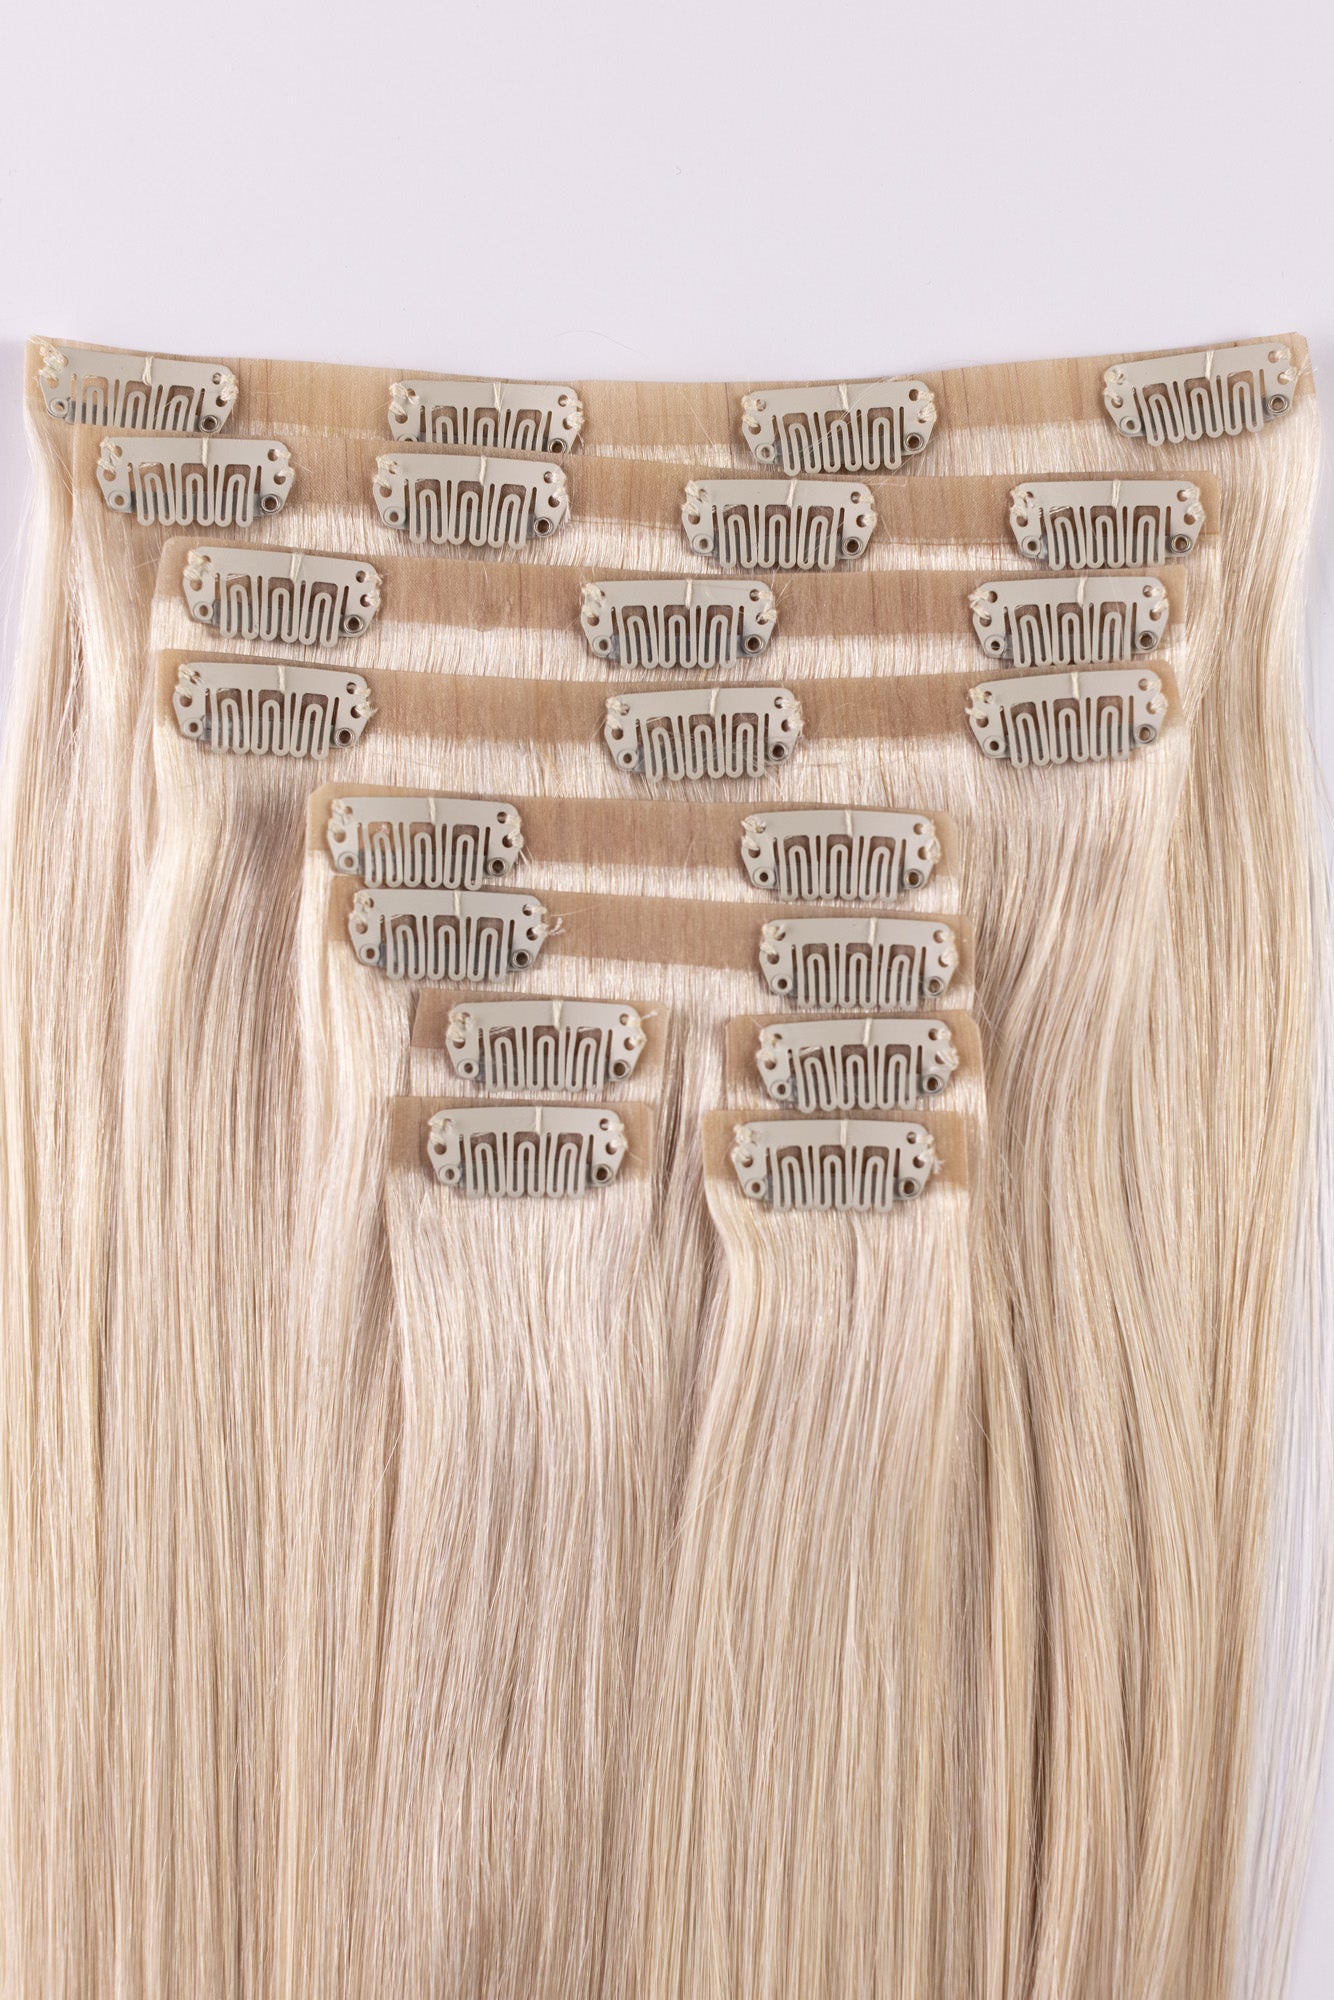 BFB Hair  Extension Holder for Styling and Storage